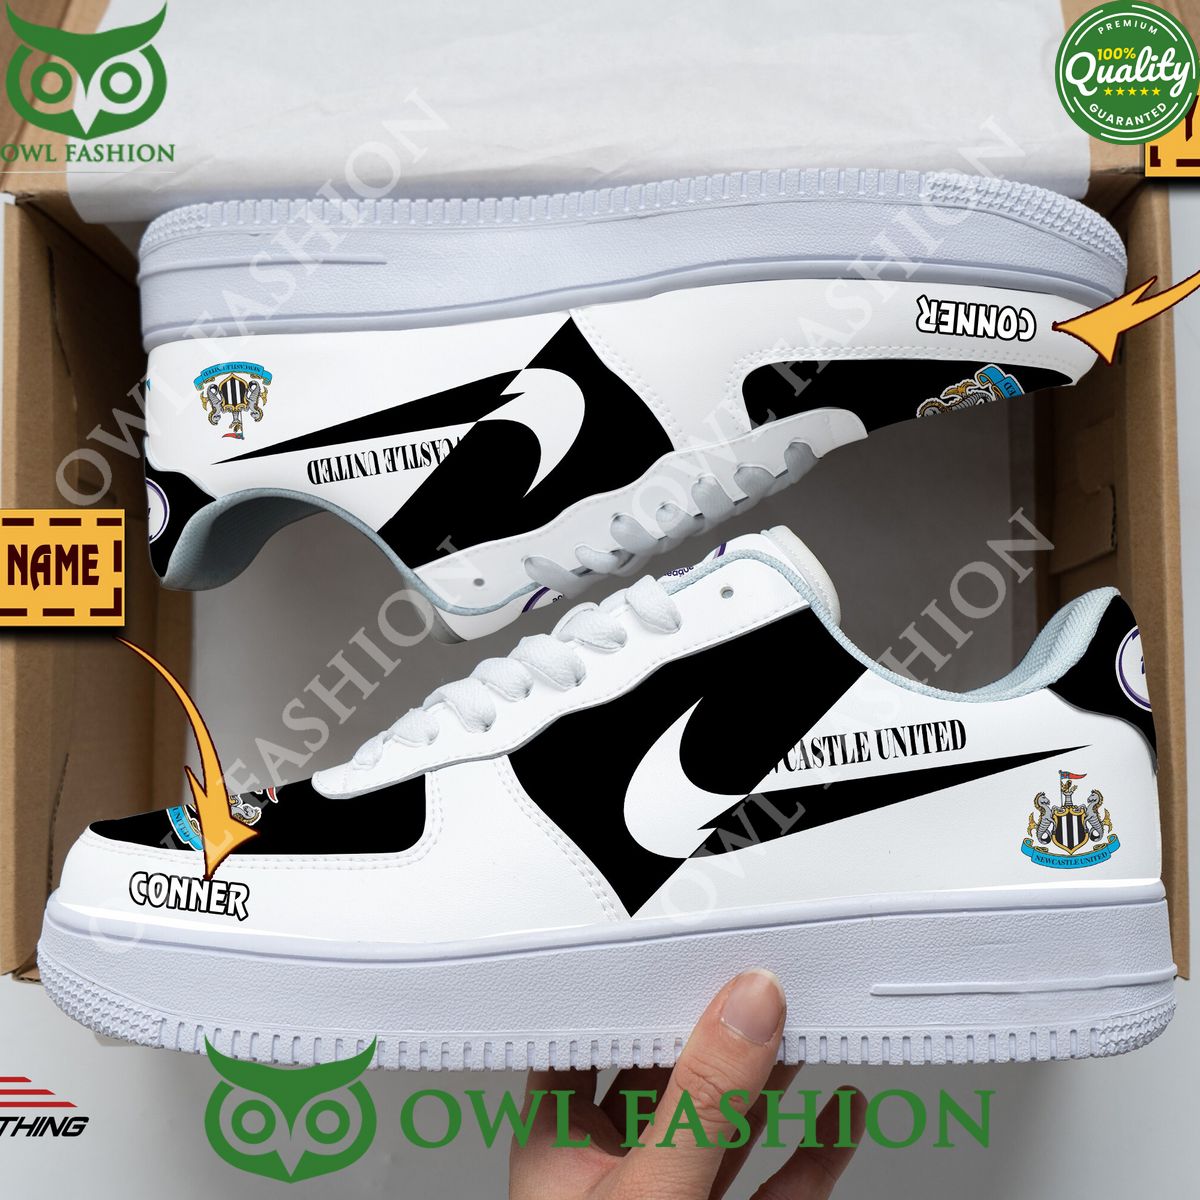 premier league newcastle united f c personalized air force 1 shoes 1 7xmo3.jpg